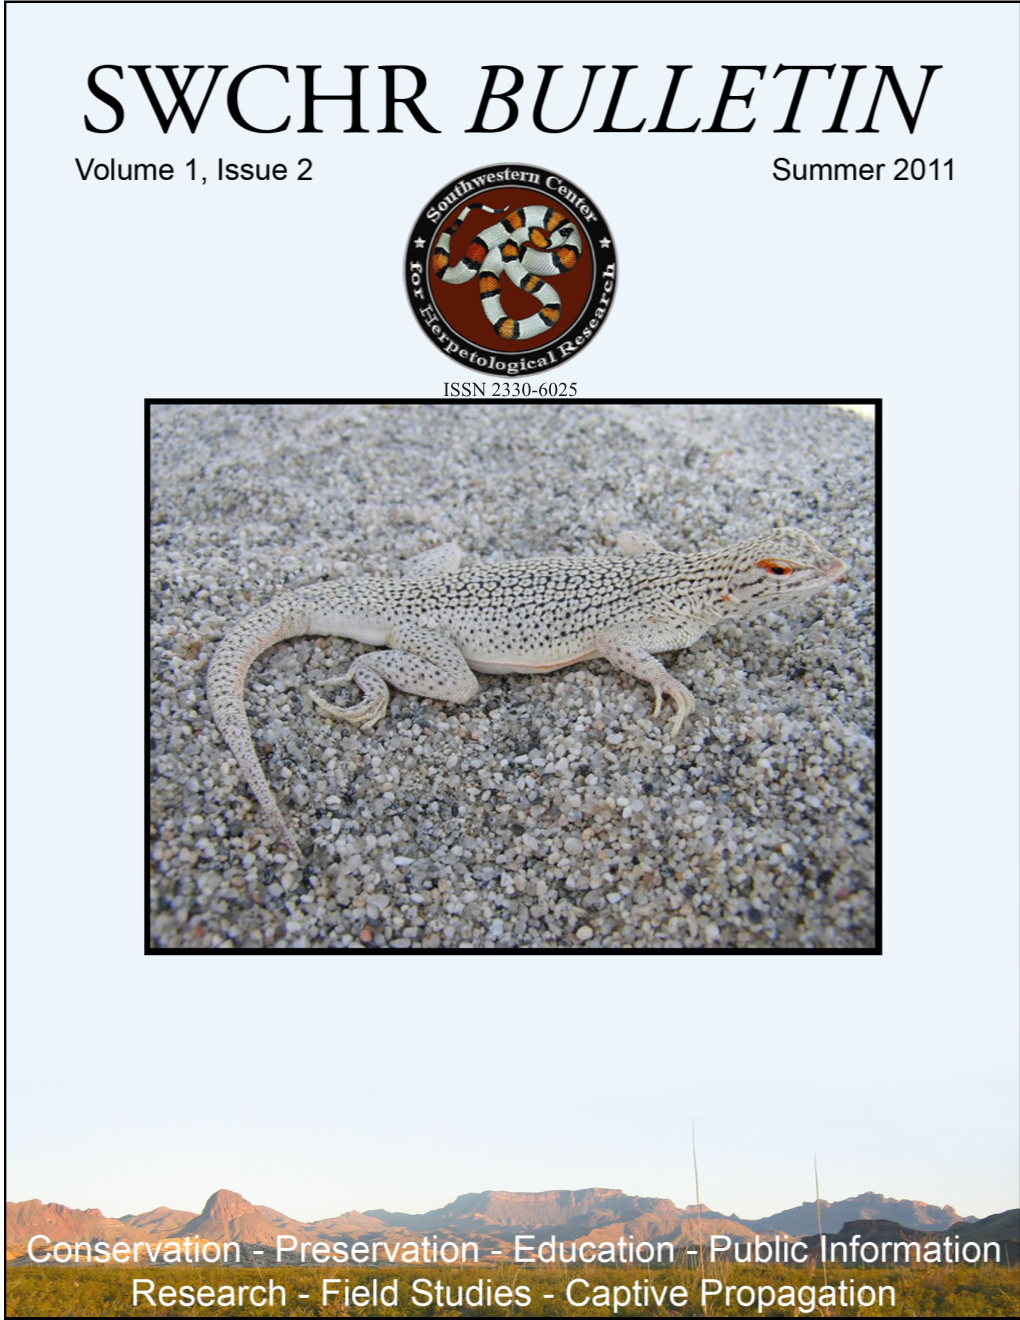 SWCHR BULLETIN Published Quarterly by the SOUTHWESTERN CENTER for HERPETOLOGICAL RESEARCH (SWCHR) P.O